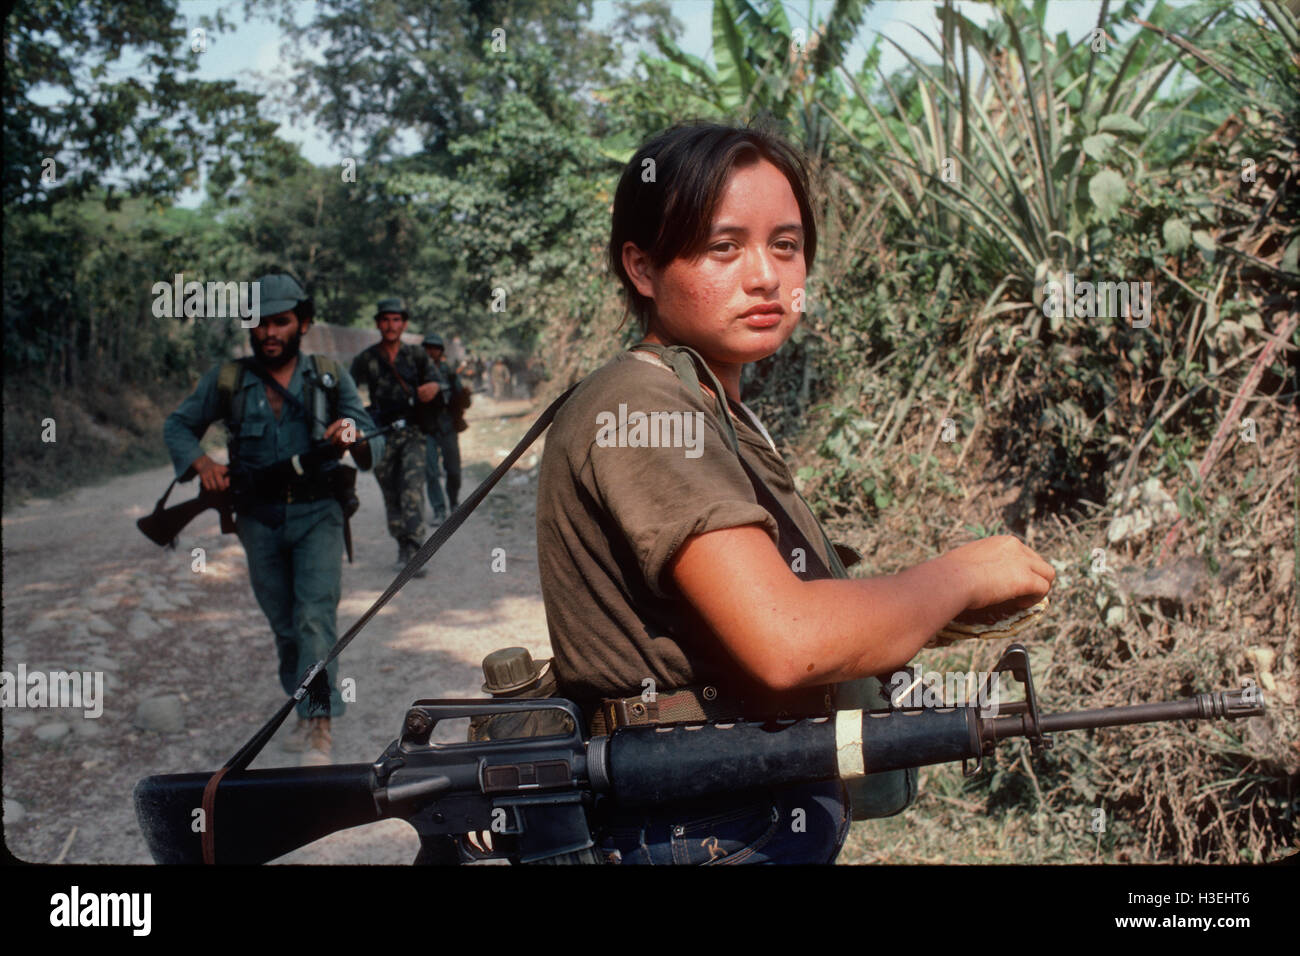 TENANCINGO,  EL SALVADOR, FEB 1984: - Within the FPL Guerrilla's Zones of Control - Some of the 1,000 guerillas that had been gathered in preparation for a guerrilla offensive, less than 40 miles from the capital, include woman combatants. Stock Photo